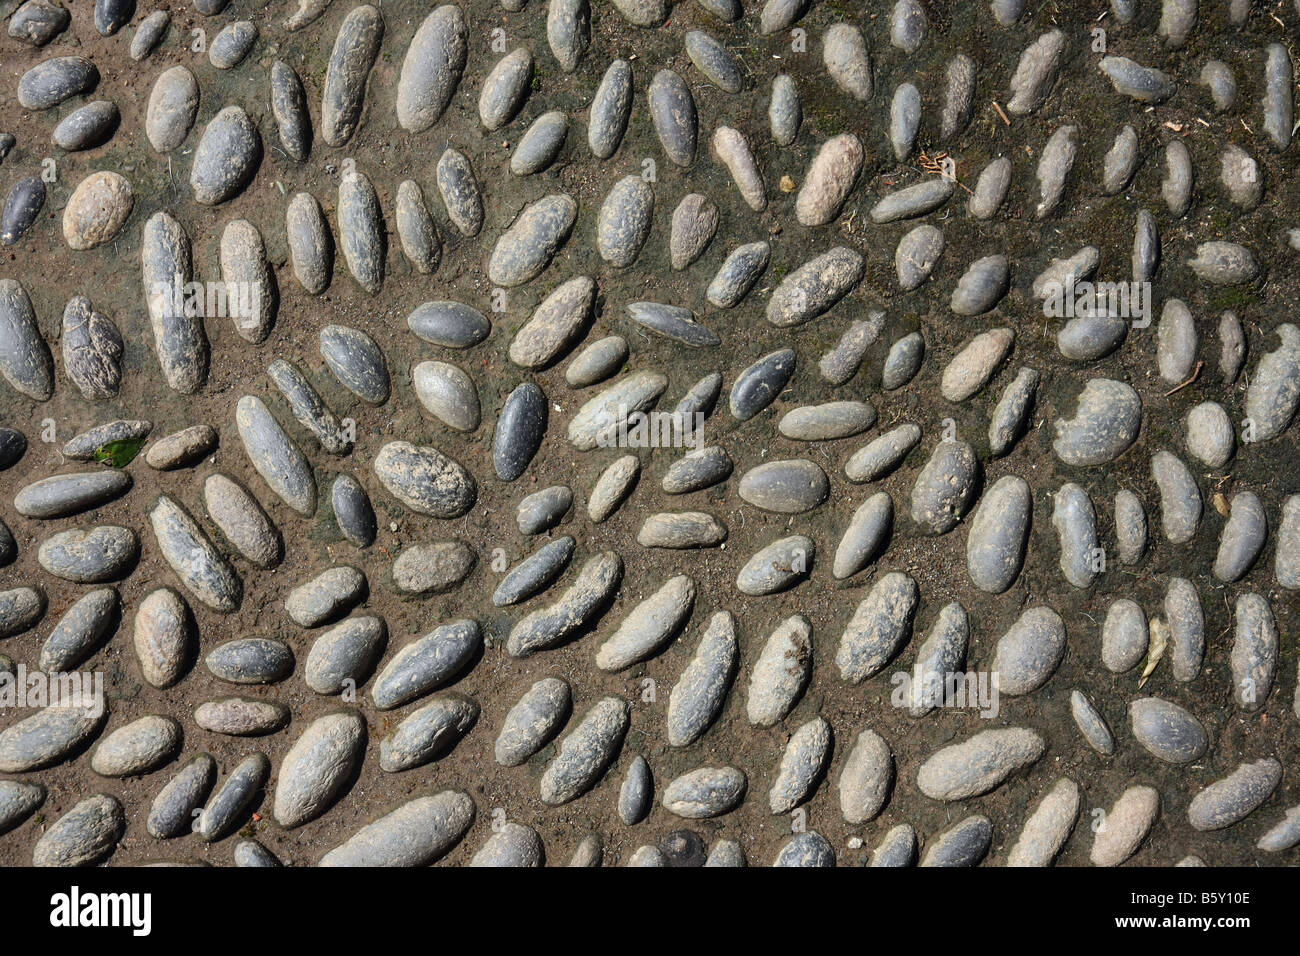 Small oval stones as paving stones on a walking path Stock Photo